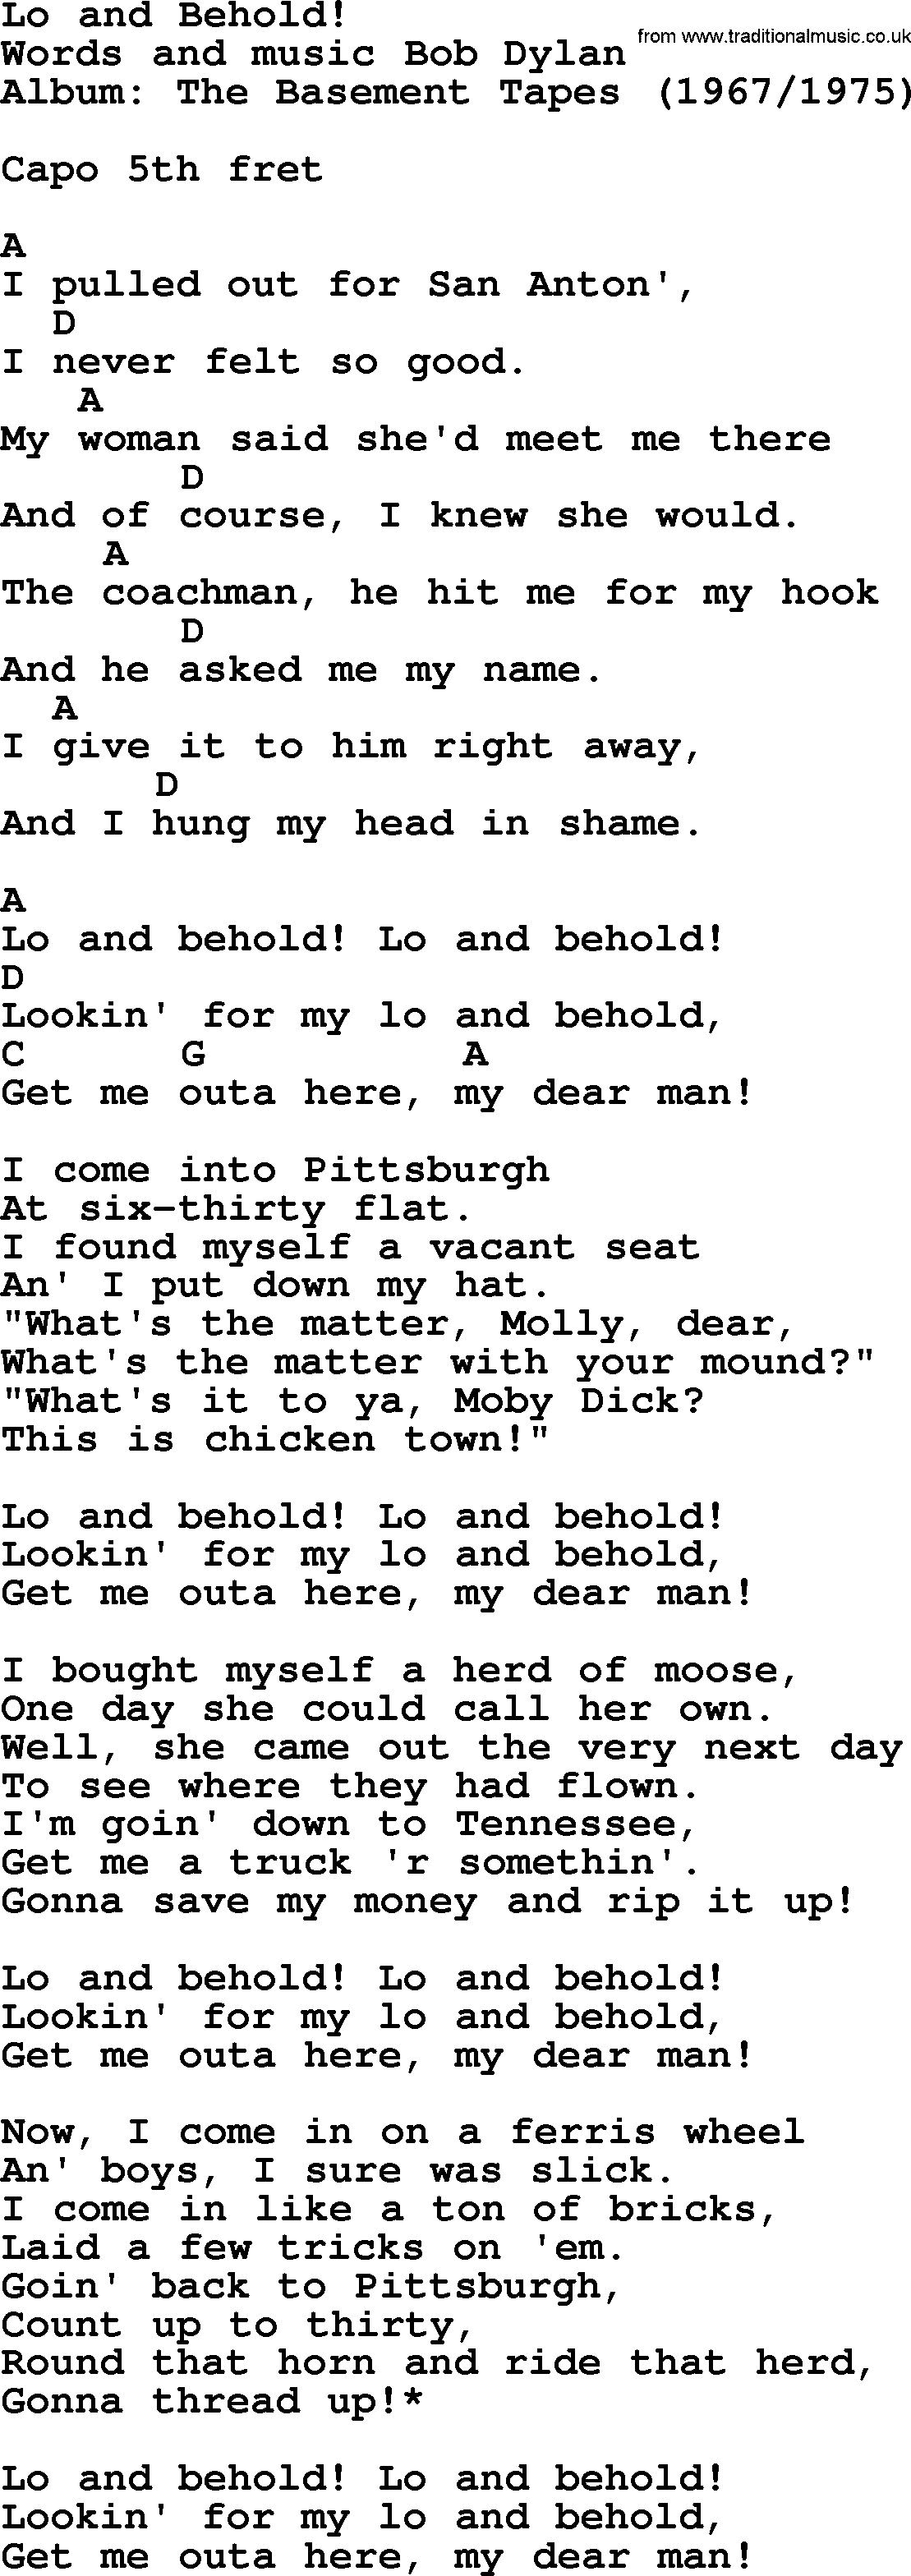 Bob Dylan song, lyrics with chords - Lo and Behold!